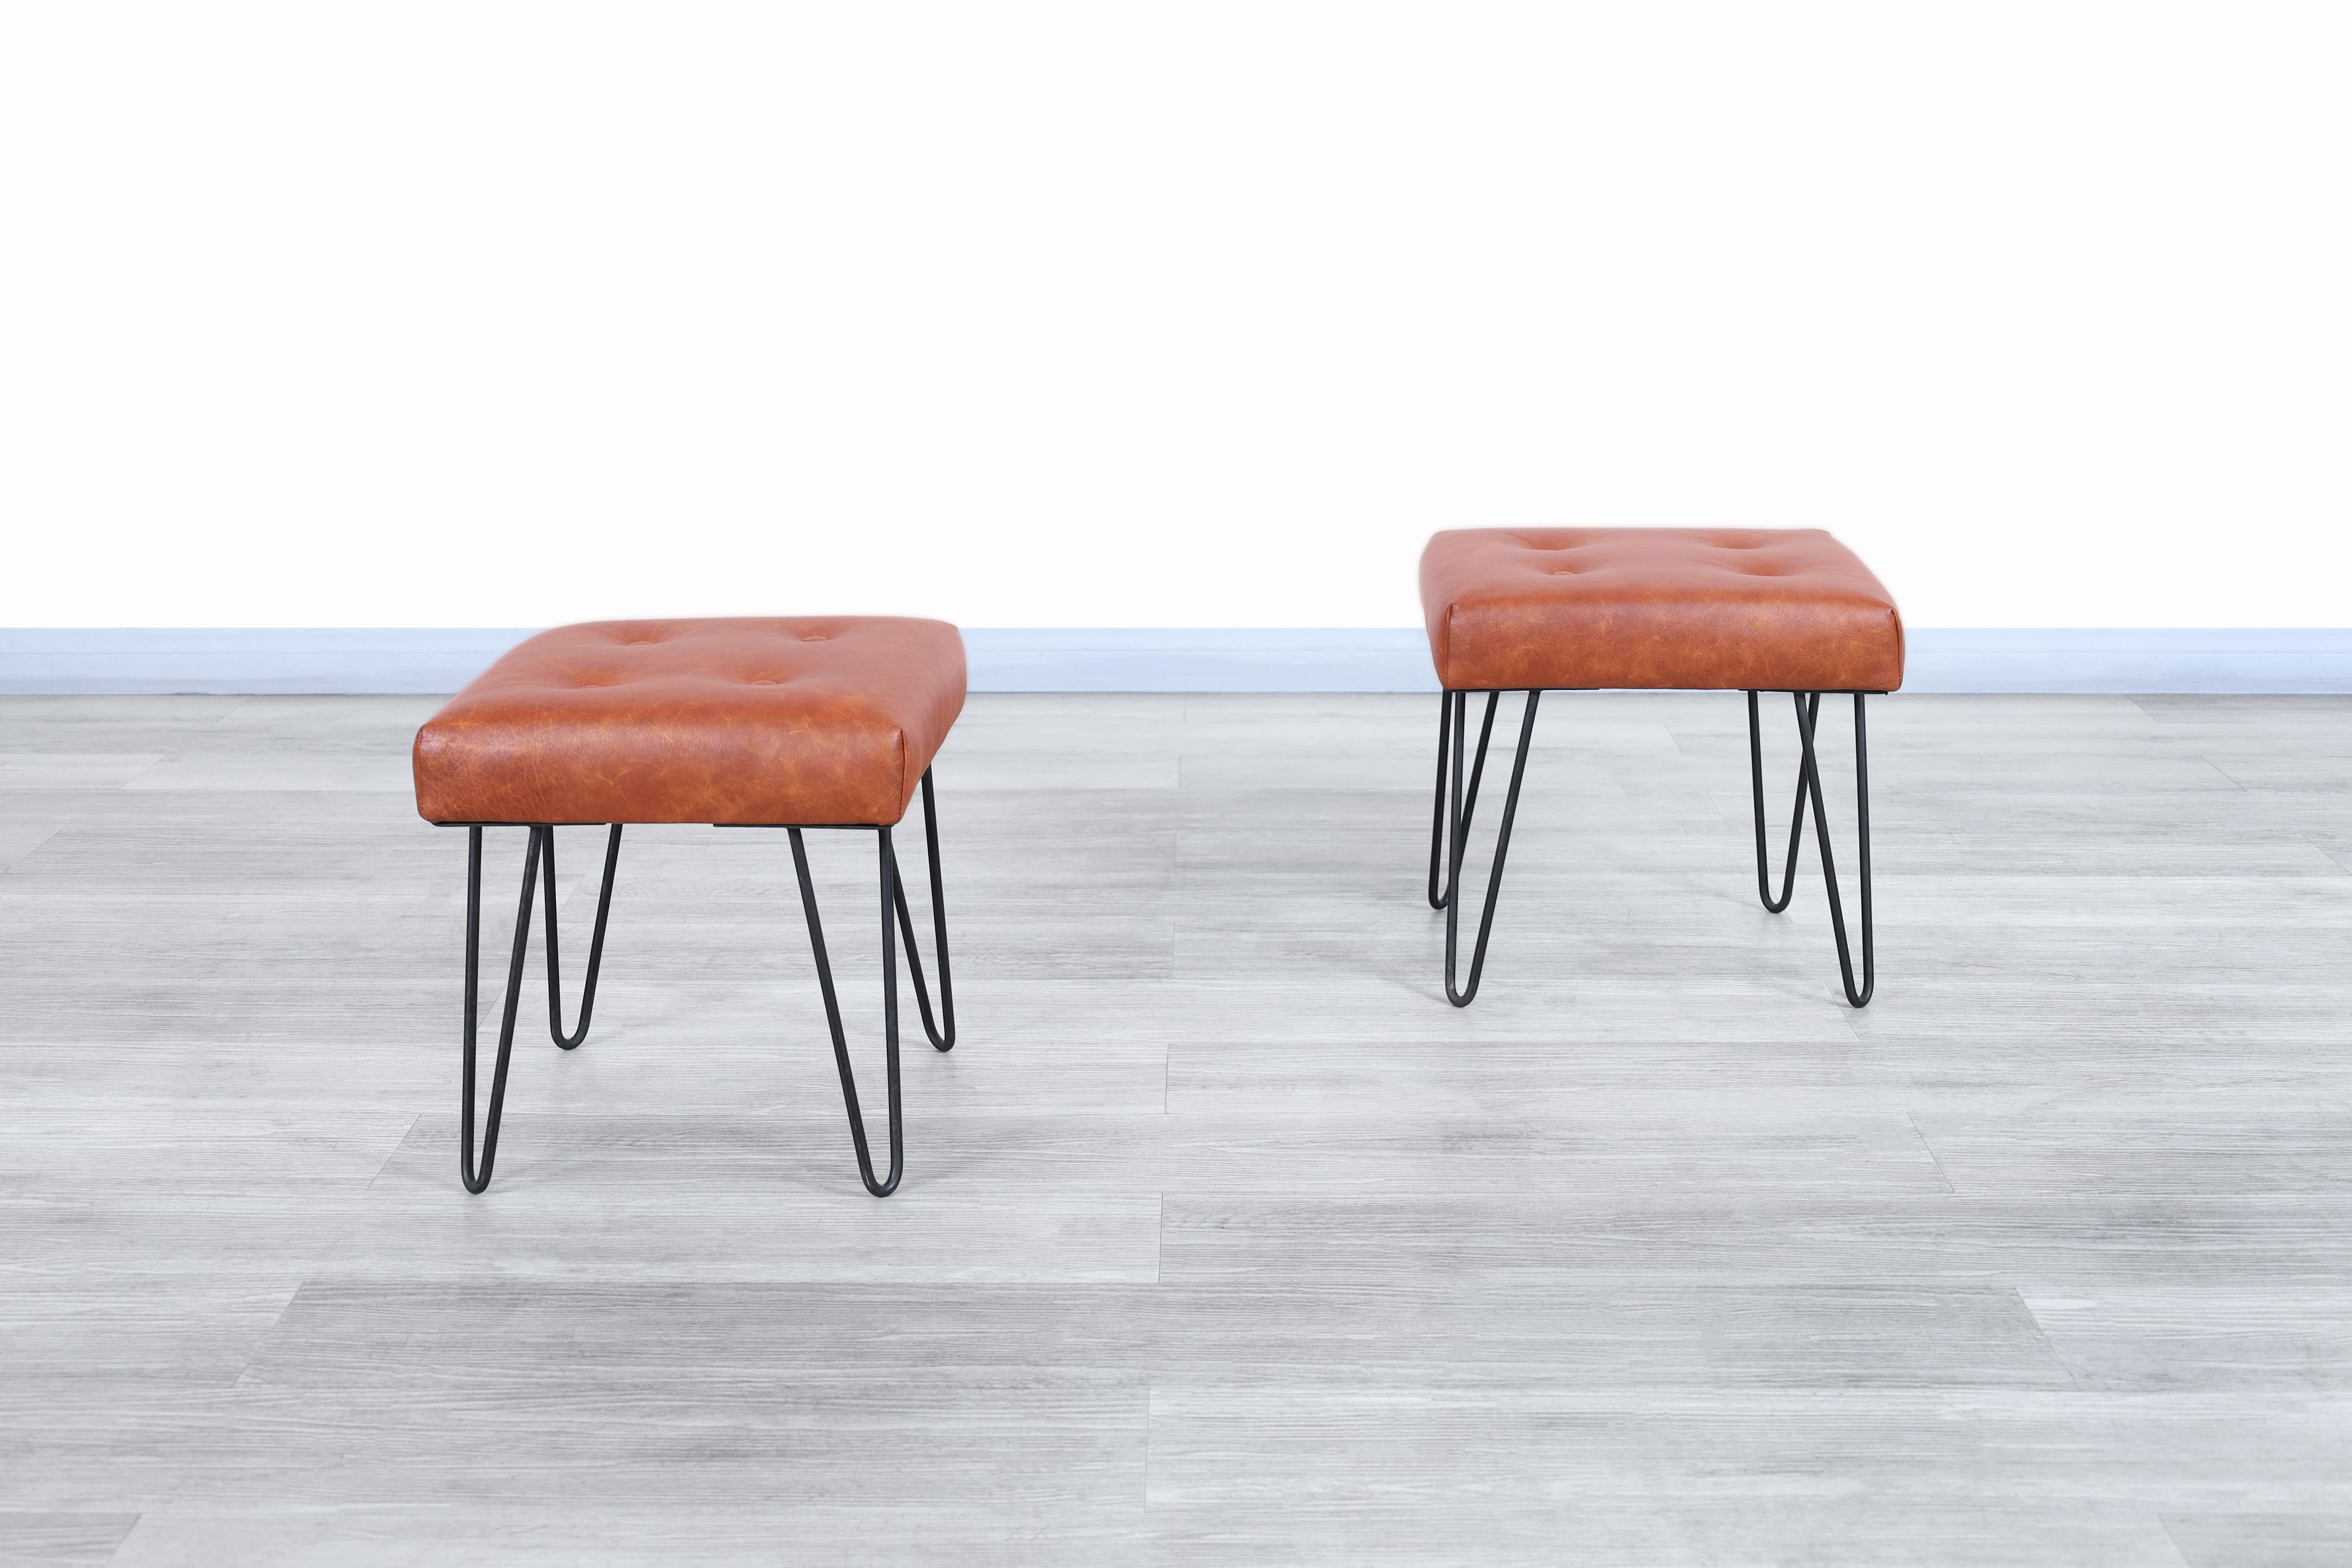 Fabulous vintage leather and iron stools designed and manufactured in the United States, circa 1950s. These stools have an elegant structure that prioritizes beauty and space for the user. Each stool has leather-upholstered cushions, on which